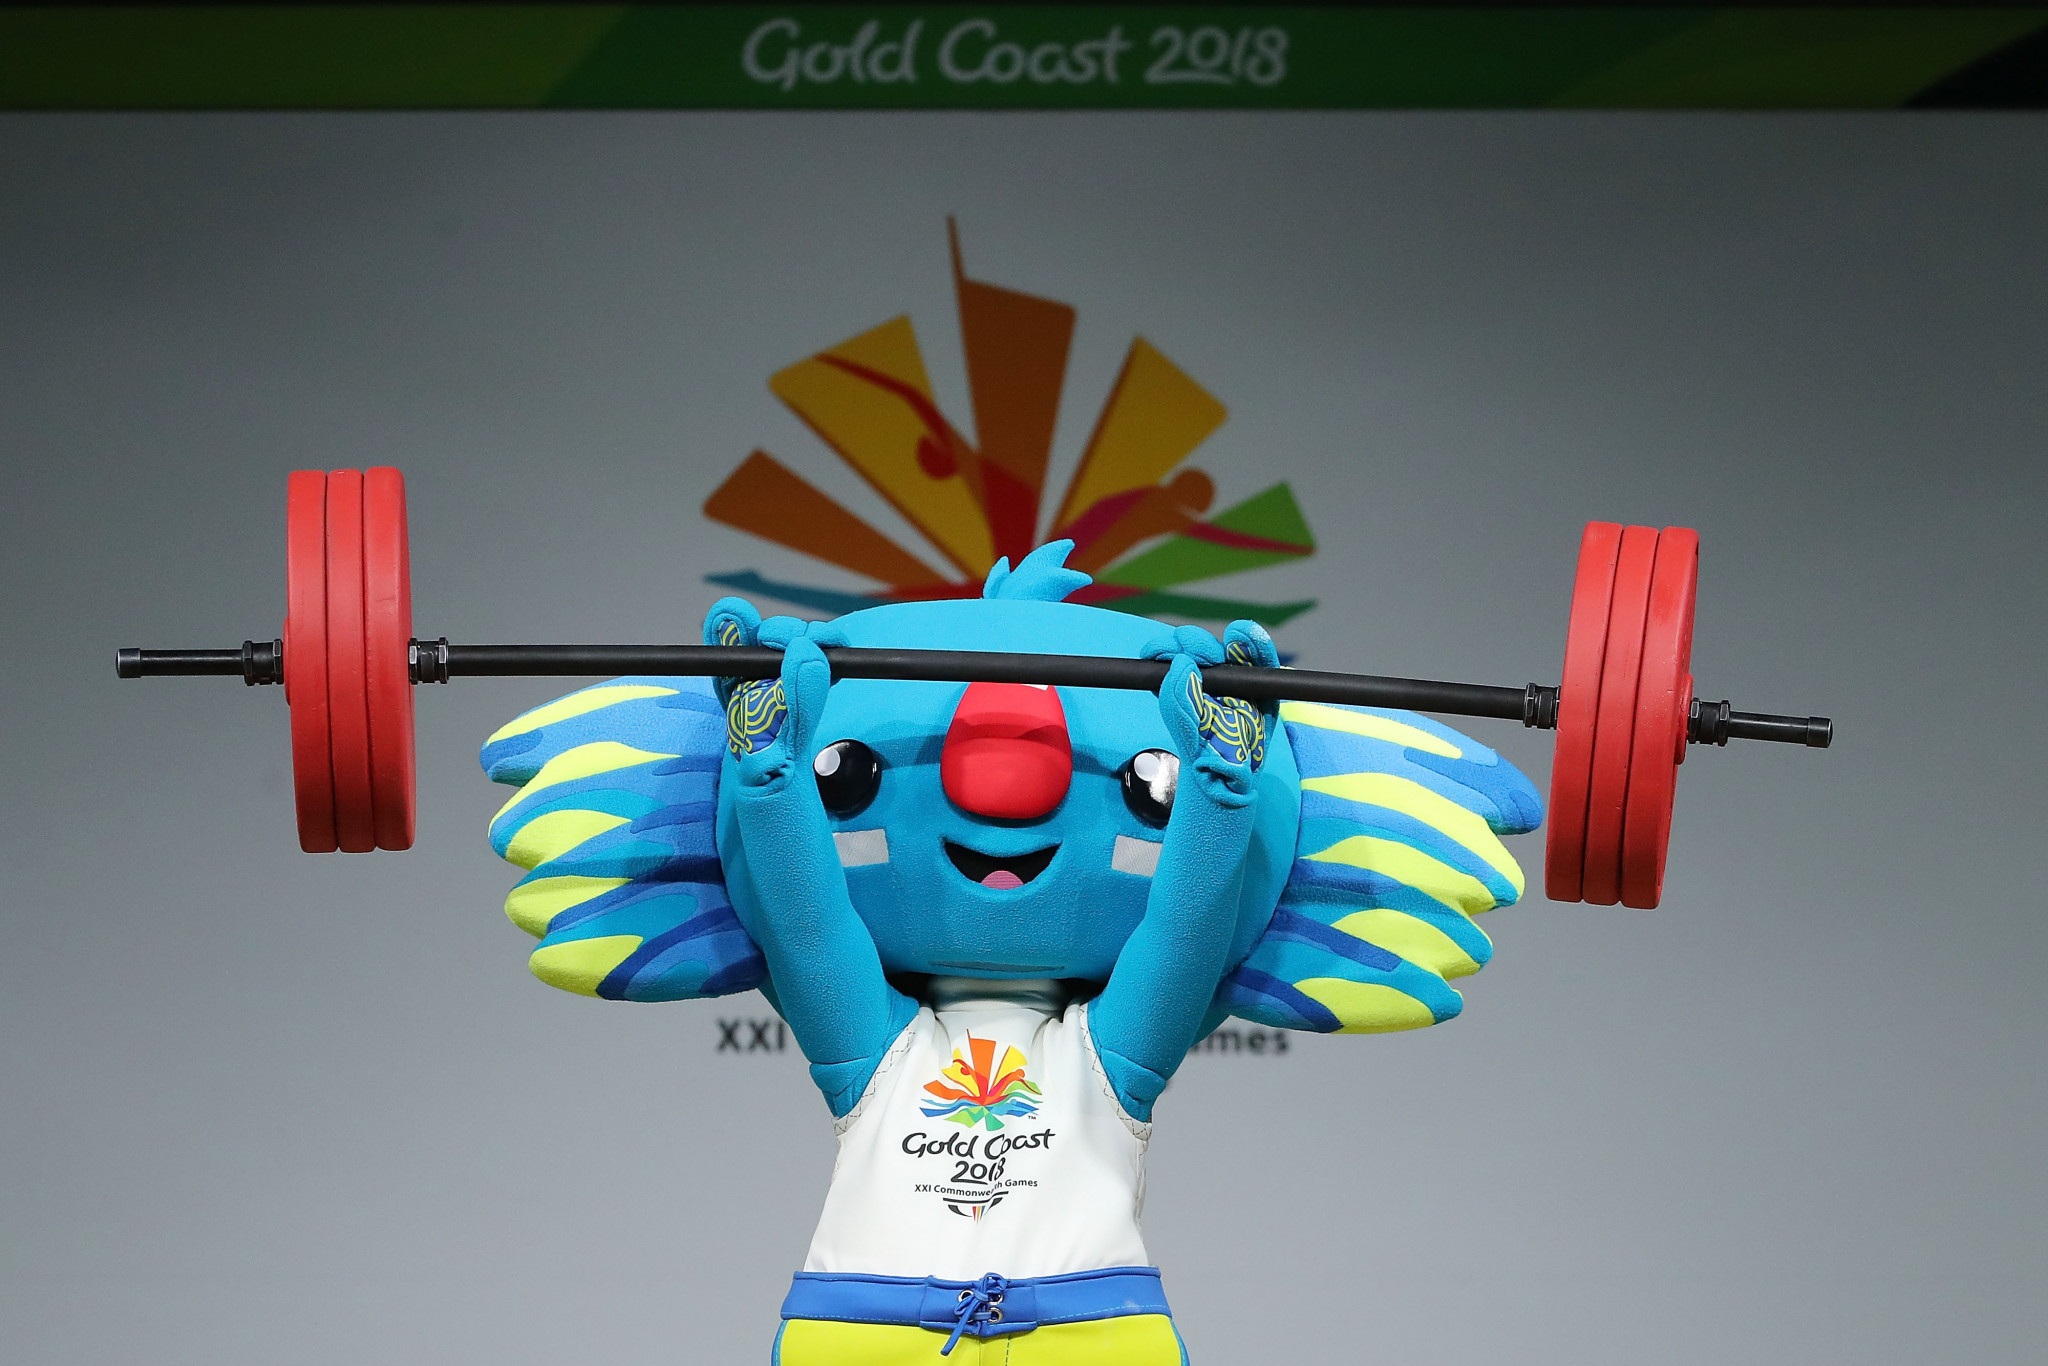 Gold Coast in Australia hosted the 2018 Commonwealth Games ©Getty Images